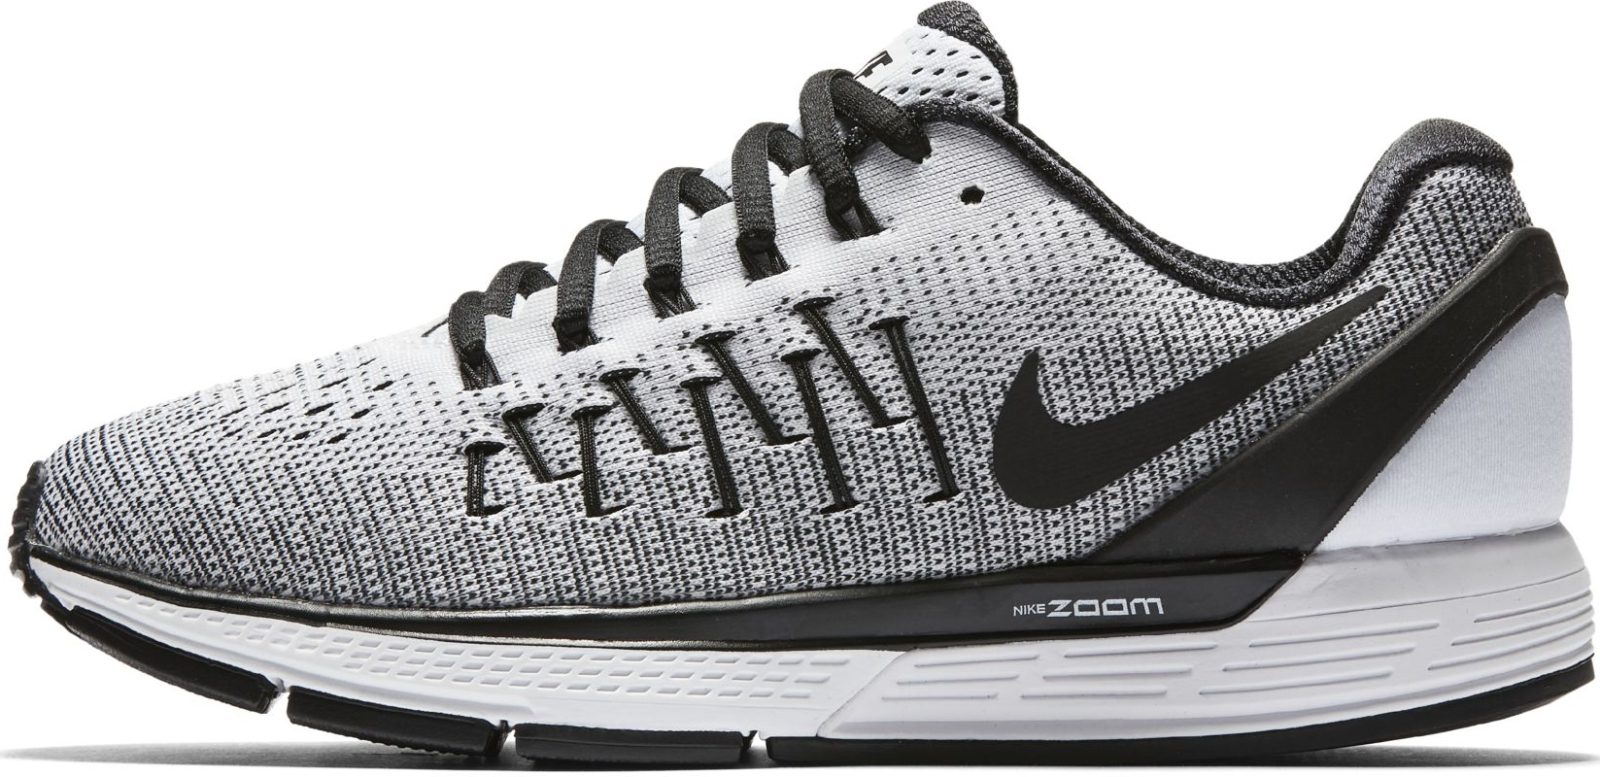 nike air zoom odyssey 2 women's running shoes